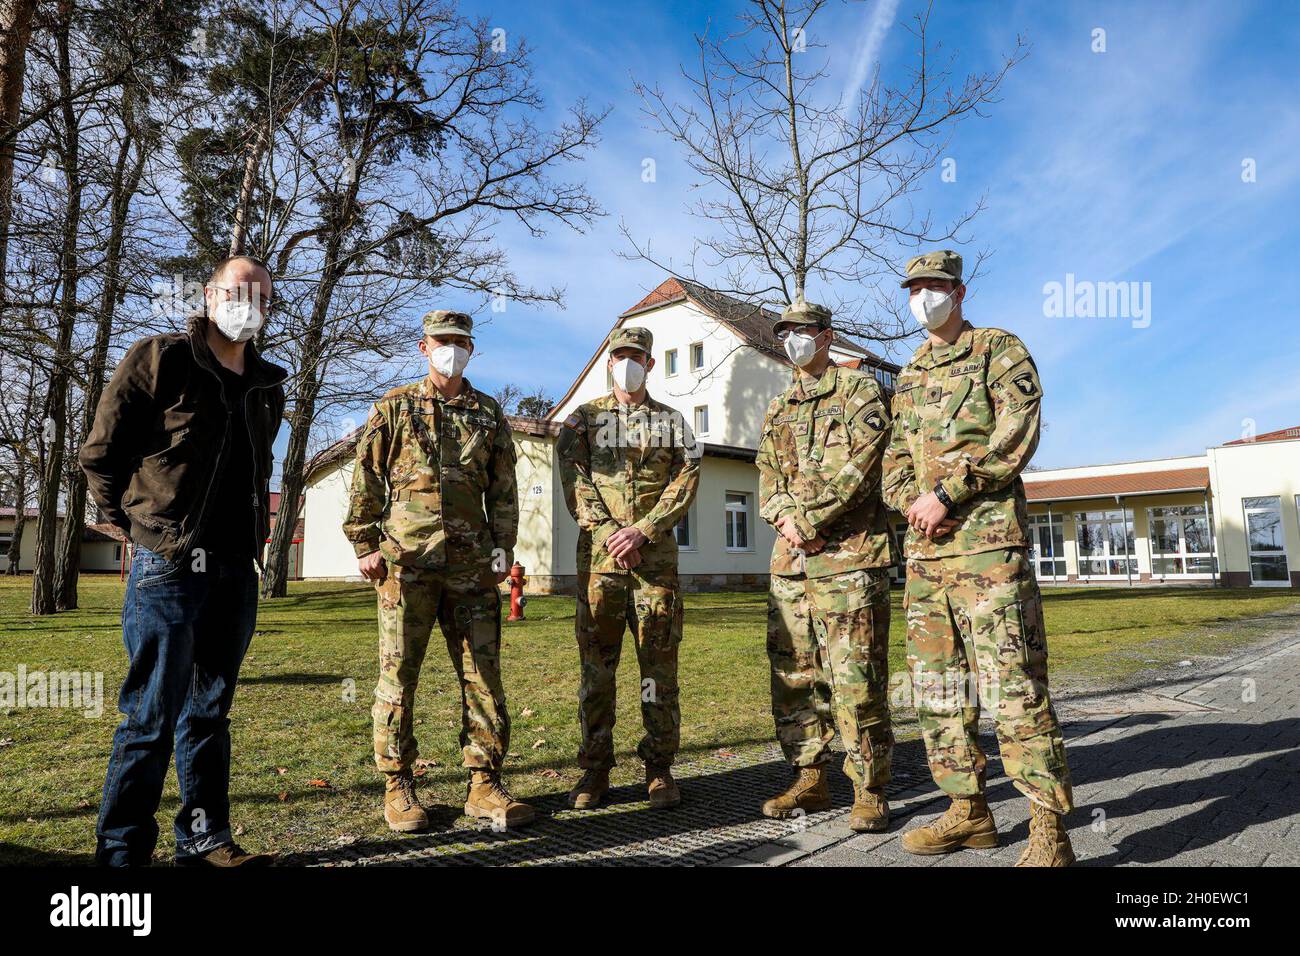 (From left to right) Joachim Strauch, a German who was treated by American Soldiers after being involved in a car crash, stands next to his rescuers; Maj. Benjamin Stork, Chief Warrant Officer 2 Robert Riedel, Sgt. Patrick Carter, and Spc. Bruce Cook, assigned to Bravo Company, 6th General Support Aviation Battalion, 101st Combat Aviation Brigade, during an awards ceremony recognizing the team for their efforts, Grafenwoehr, Germany, Feb. 18, 2021. Brig. Gen. Christopher Norrie, Commander, 7th Army Training Command, and Brig. Gen. Thomas Hambach, Commander, Landeskommando Bayern, were both pre Stock Photo